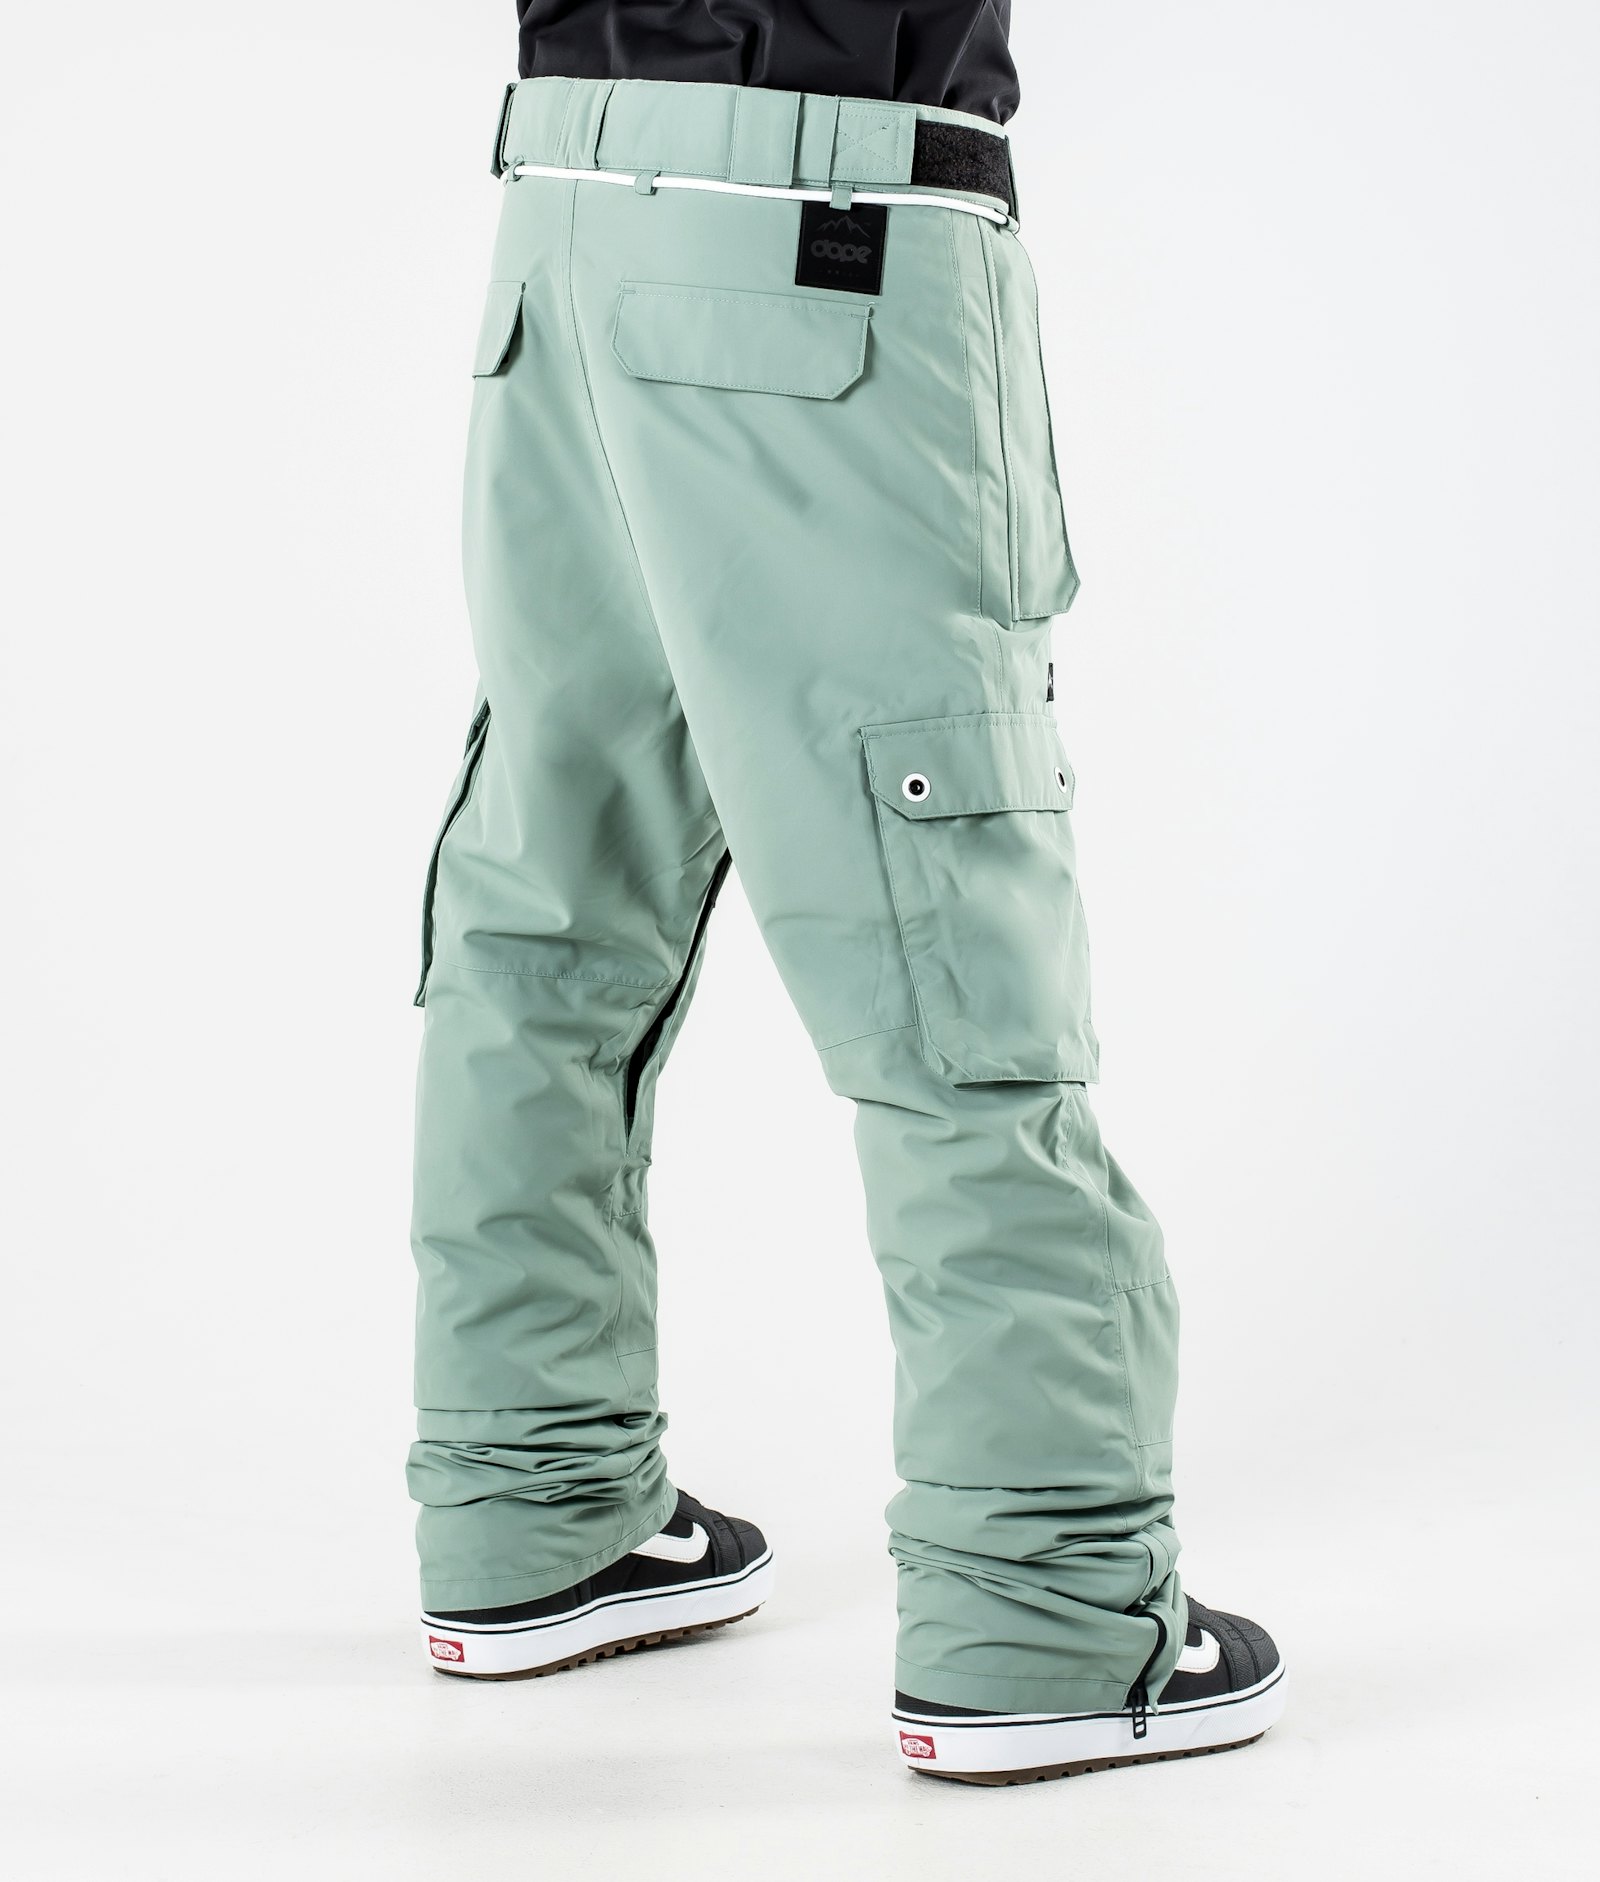 Dope Iconic 2020 Pantalones Snowboard Hombre Faded Green